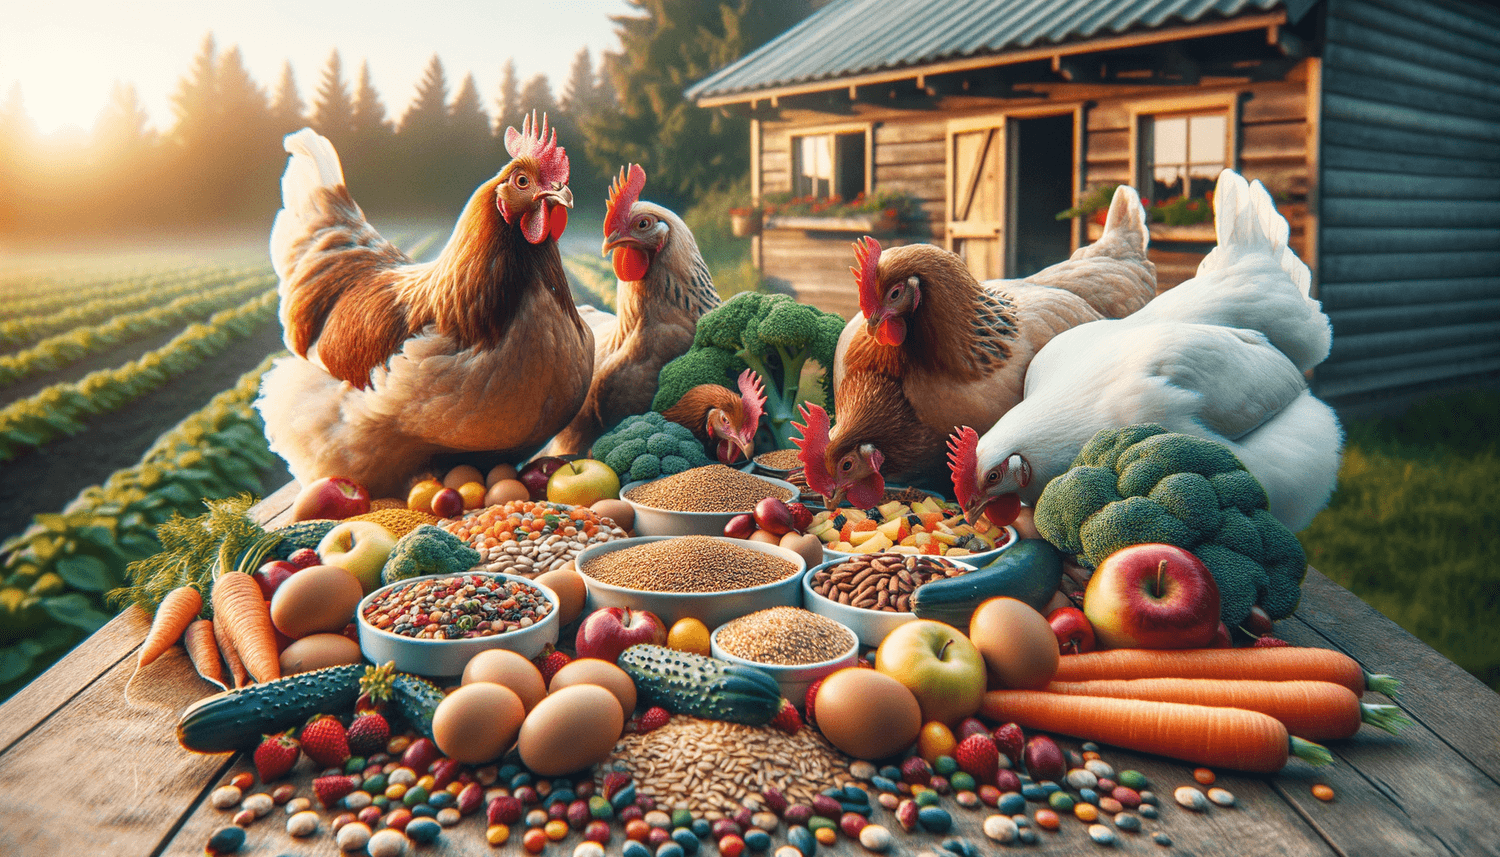 Can Chickens Eat Too Much?